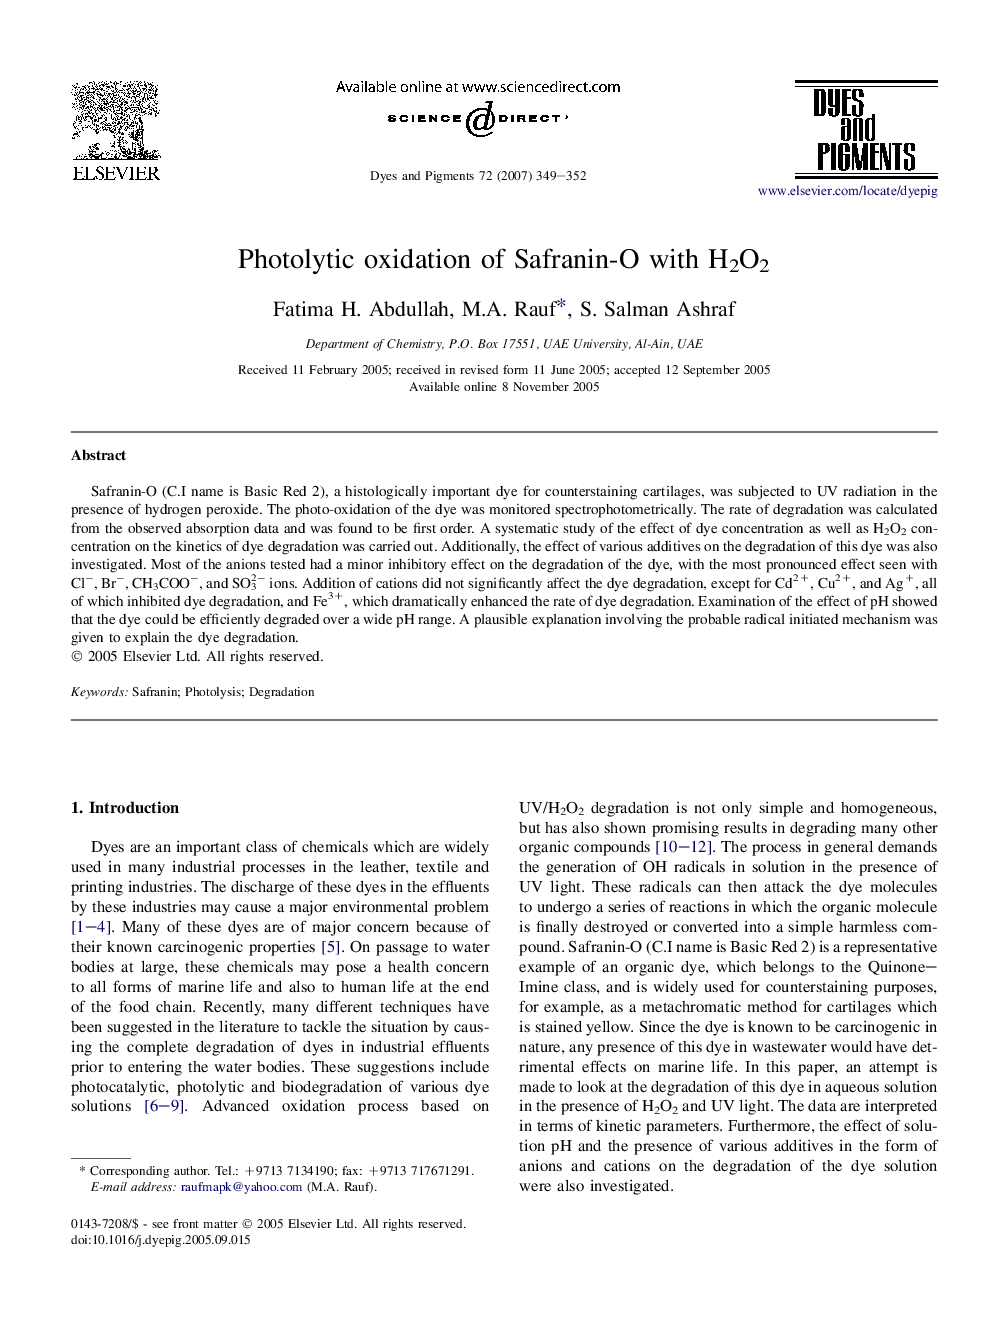 Photolytic oxidation of Safranin-O with H2O2